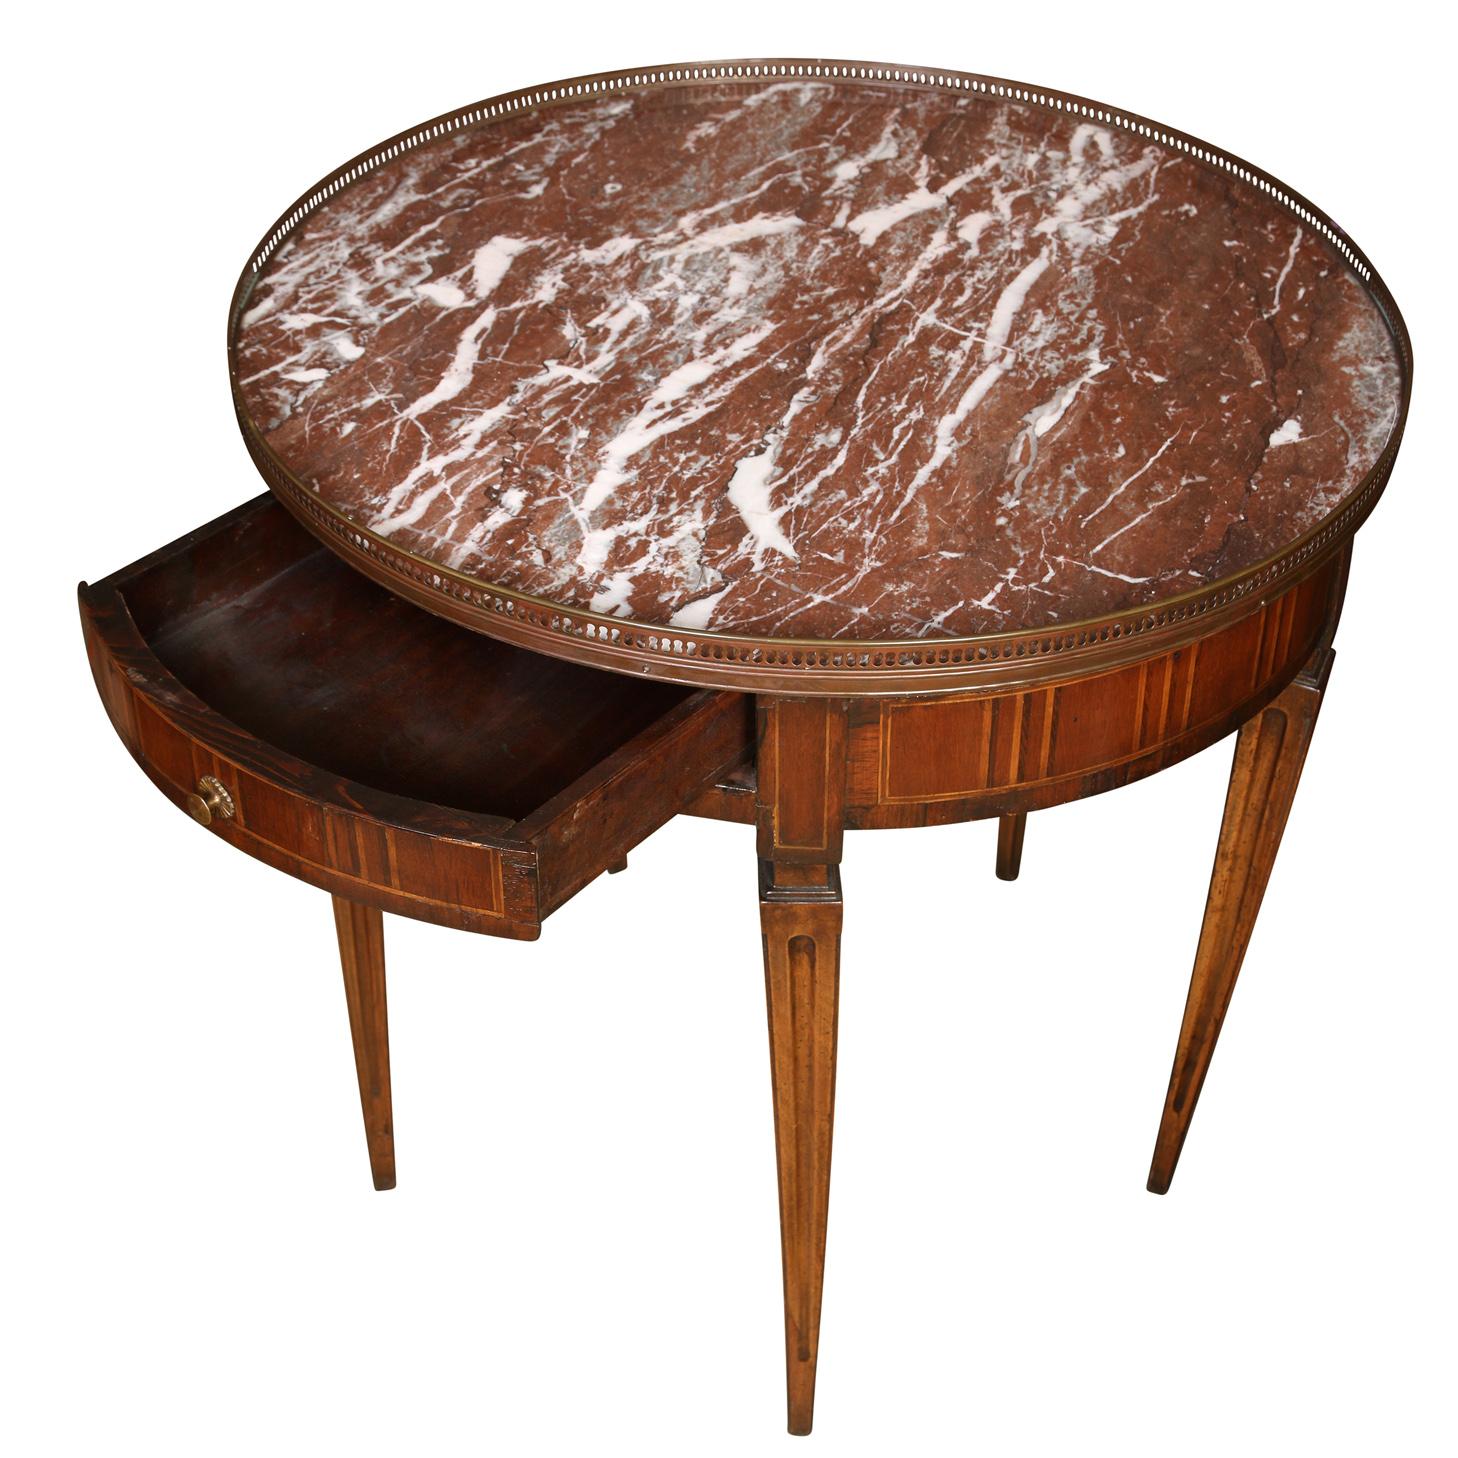 A vintage Louis XVI style bouillotte table with a pierced brass gallery encircling a rouge marble top.  The beautiful gueridon table details include an inlay design on the curved table body and fluted tapered legs with a notch at the top.  An